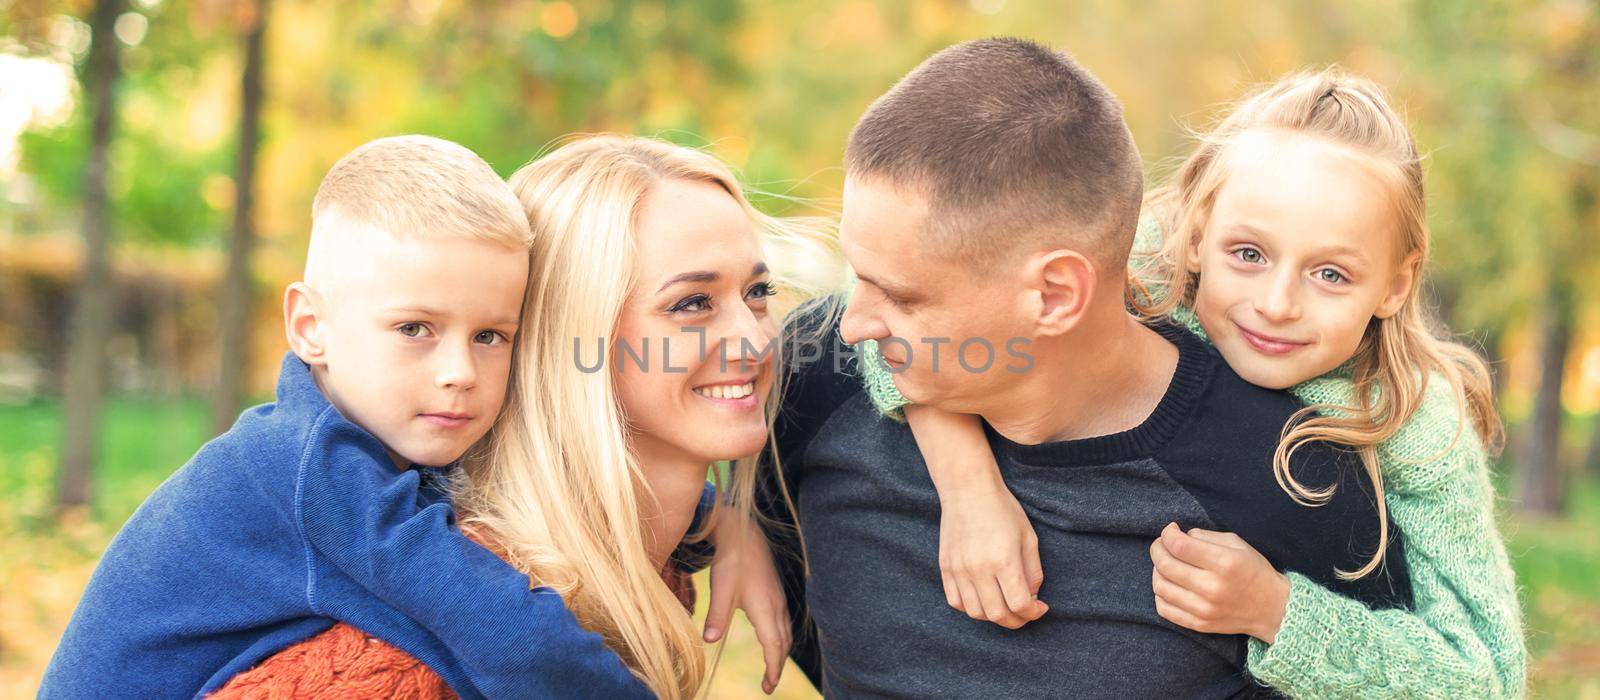 Portrait of young family playing in autumn park. Parents with children resting in the autumn park